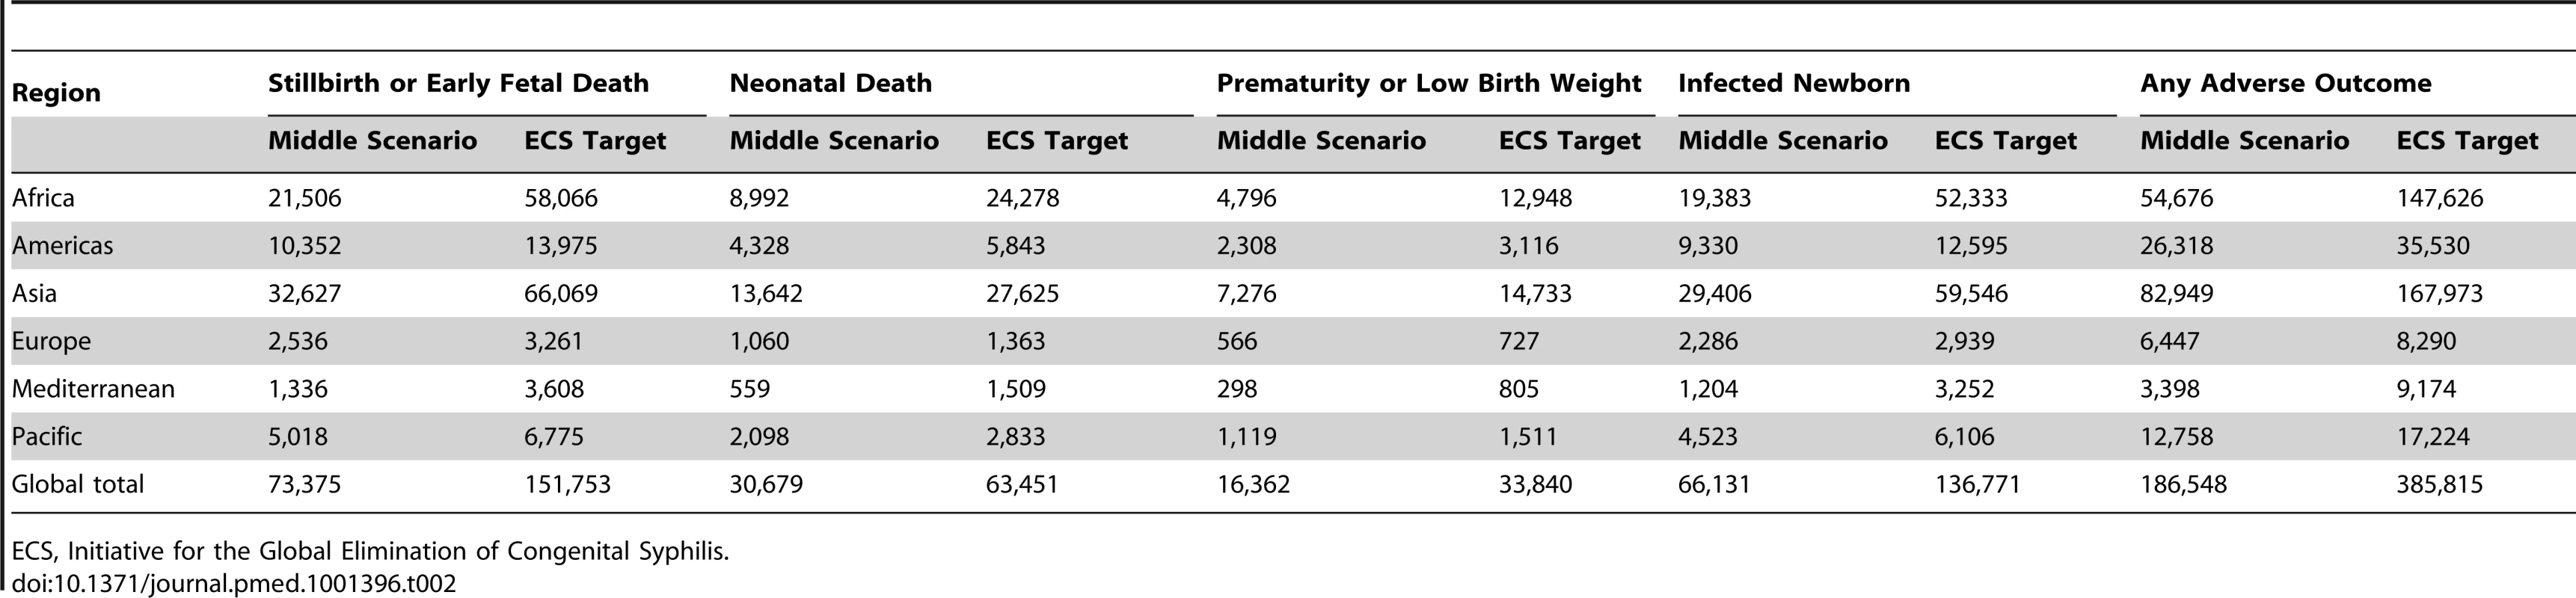 Estimated number of adverse outcomes associated with syphilis in pregnancy averted in the middle scenario in 2008, and if Initiative for the Global Elimination of Congenital Syphilis targets for 2015 for testing and treatment had been met in 2008.